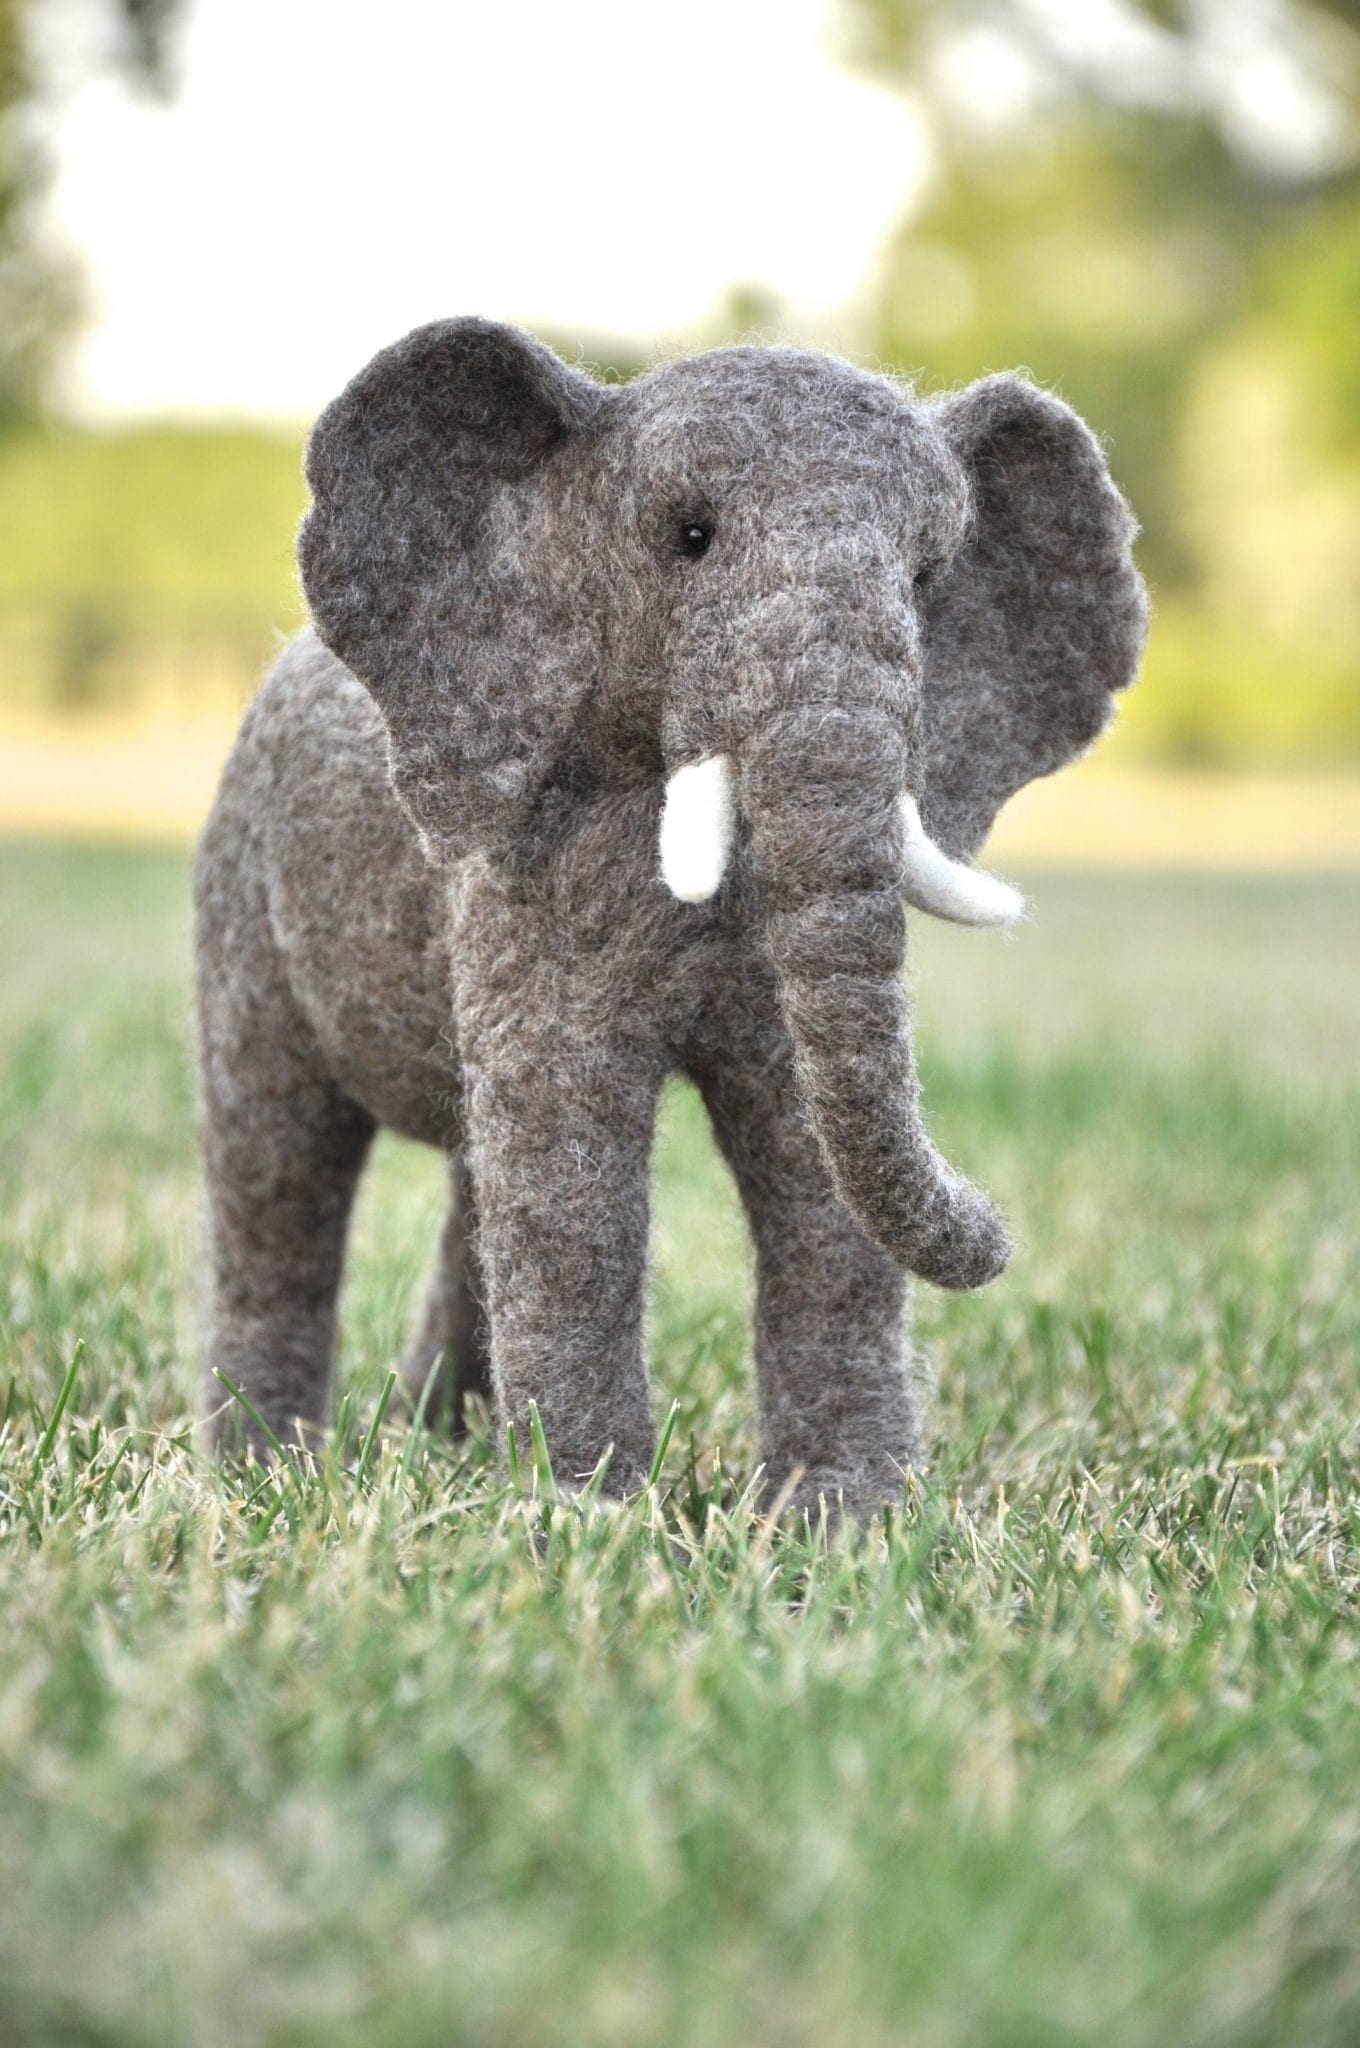 My little needle felted Pachyderm. The story behind the sculpture.